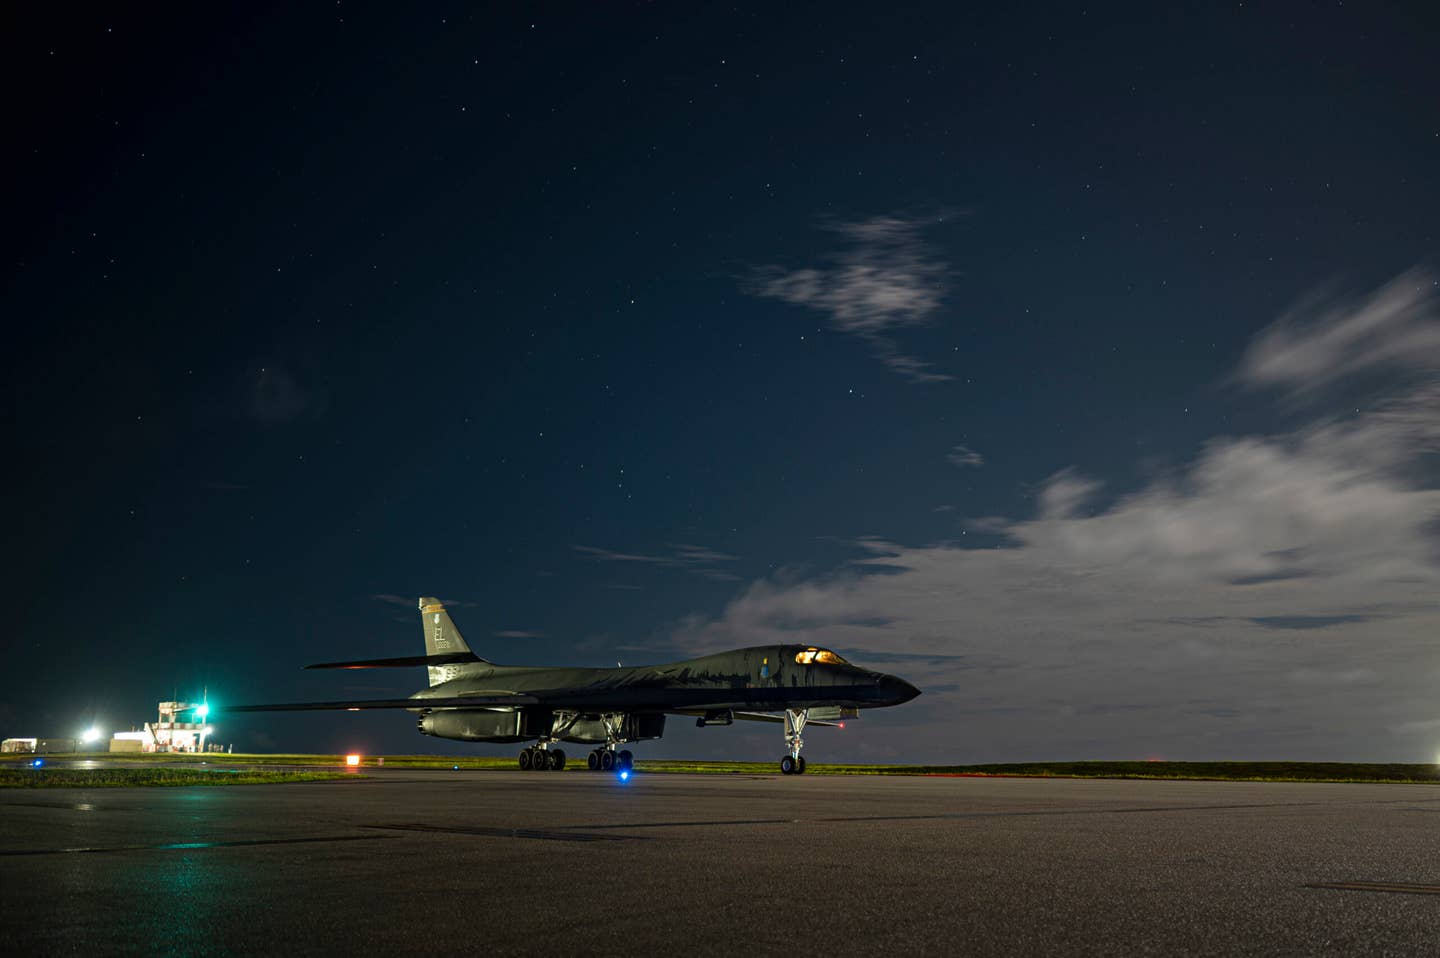 A B-1B waits on a taxiway at Andersen Air Force Base, Guam after returning from a Bomber Task Force mission, June 17, 2022. <em>U.S. Air Force photo by Master Sgt. Nicholas Priest</em>